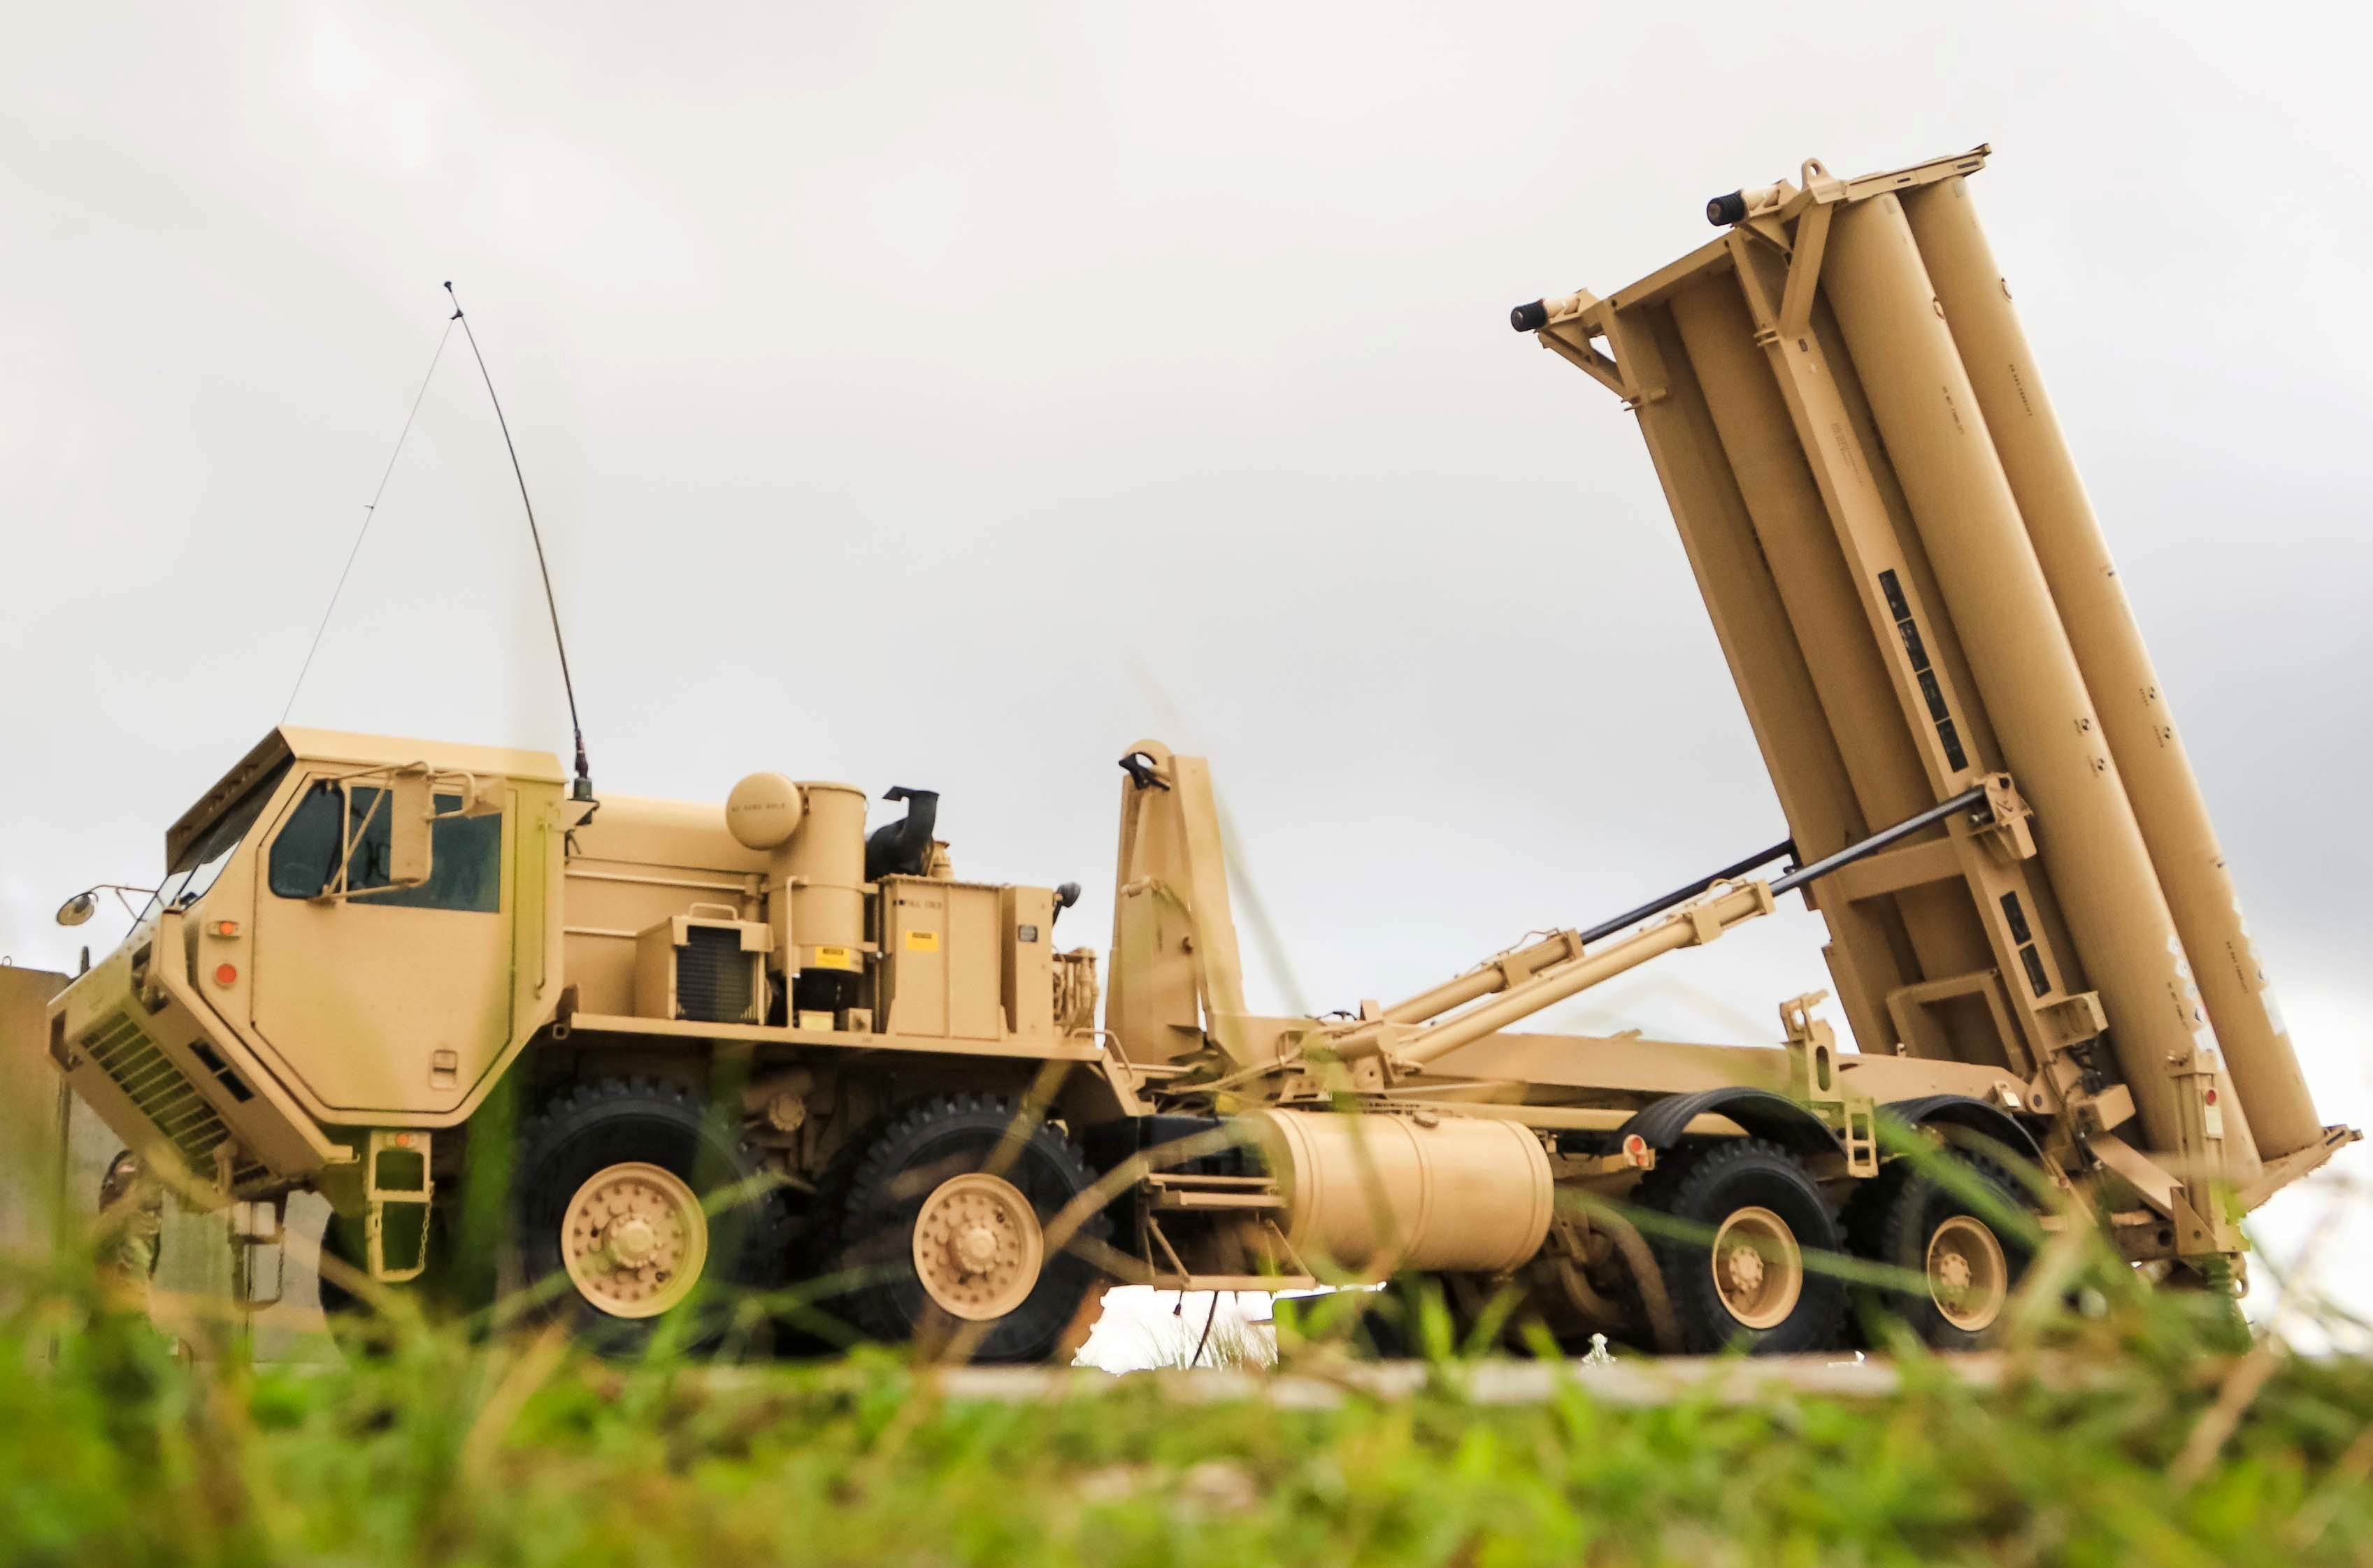 A U.S. Army Terminal High Altitude Area Defense (THAAD) weapon system is seen on Andersen Air Force Base